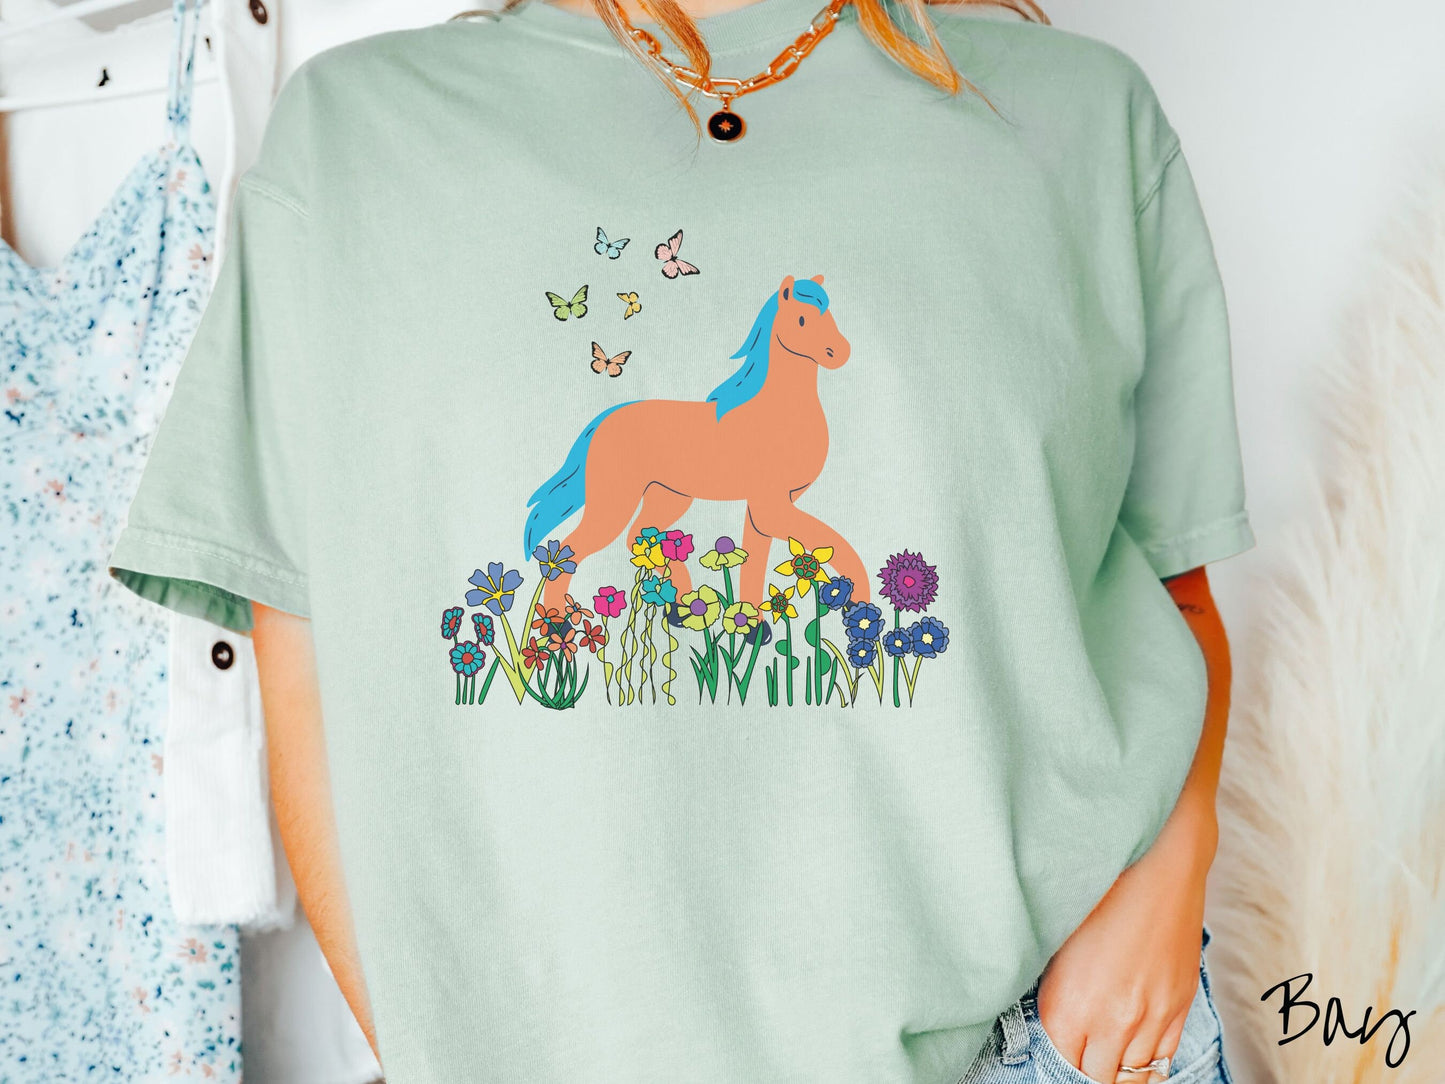 A woman wearing a cute, vintage bay colored Comfort Colors shirt with a brown horse with blue hair walking through a field of colorful flowers and grass. There are colorful butterflies flying above the horse.